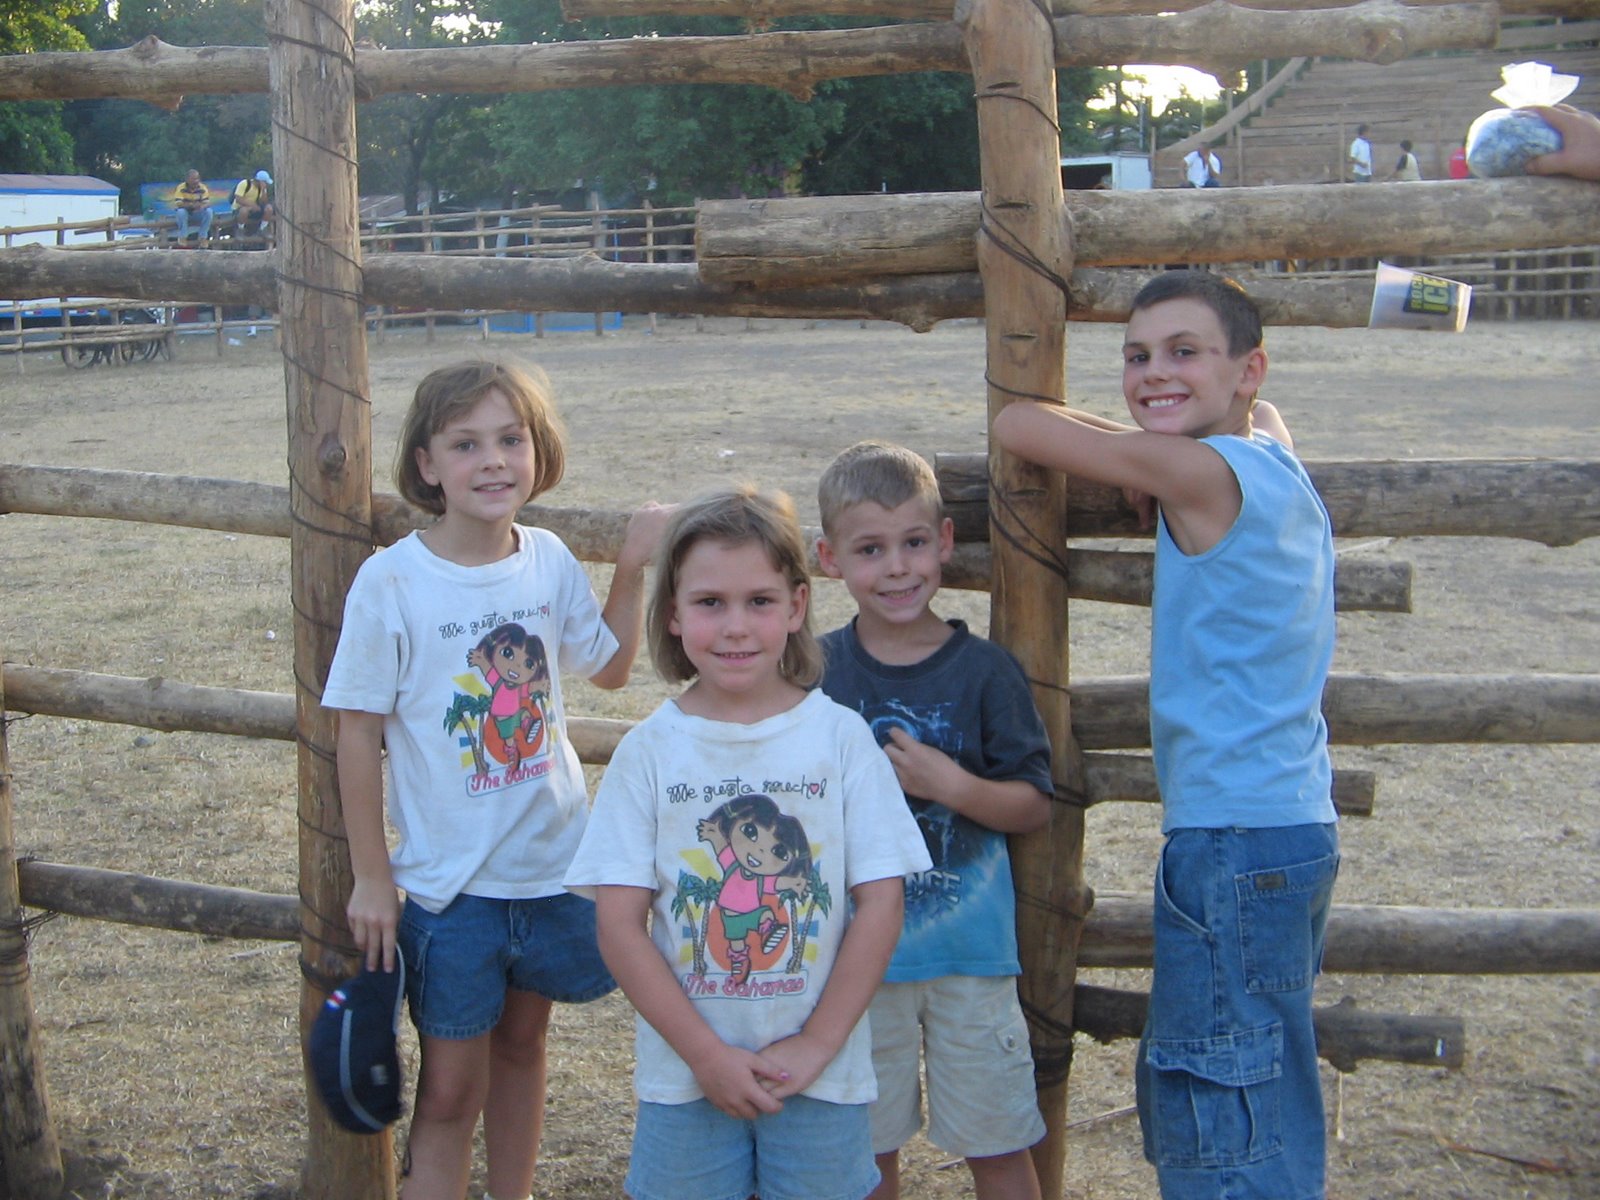 [kids+at+the+rodeo.JPG]